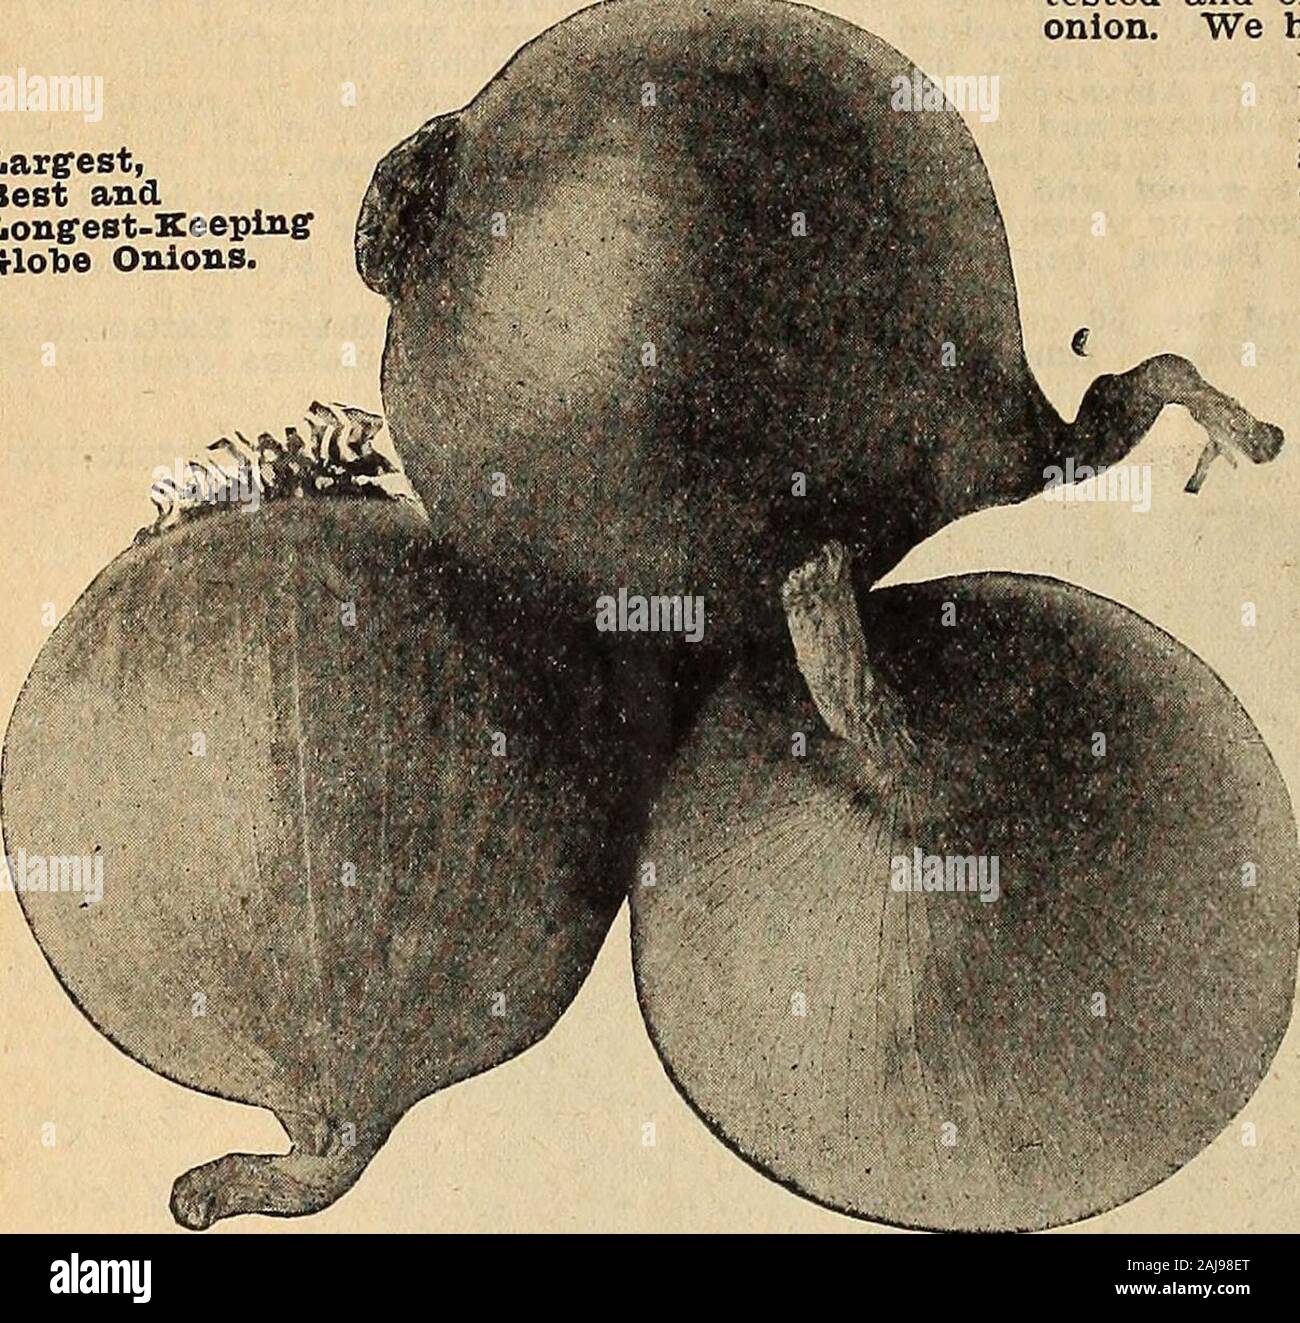 Spring catalog of Alexander's good seeds : the best that grow selected for the south . p and sweet. Inkeeping quality this is the best of all in ourexperience. Pkt. 10c; b oz. 25c; 1 oz. 45c. Our Special Stock Long . Keeper R E B GLOBE is the most striking of all in ap-pearance. It is a rich red and very hand-some. Like the Yellow and White, is a per-fect globe in shape, measuring from 2 to 3inches in diameter and as hard as a ball.Postpaid, pkt. 10c; ya oz. 25c; 1 oz. 45c. Our Special Stock Long-Keeper WHITEGLOBE is the mildest in flavor and seemsto be the earliest It is crystal snow white,a Stock Photo